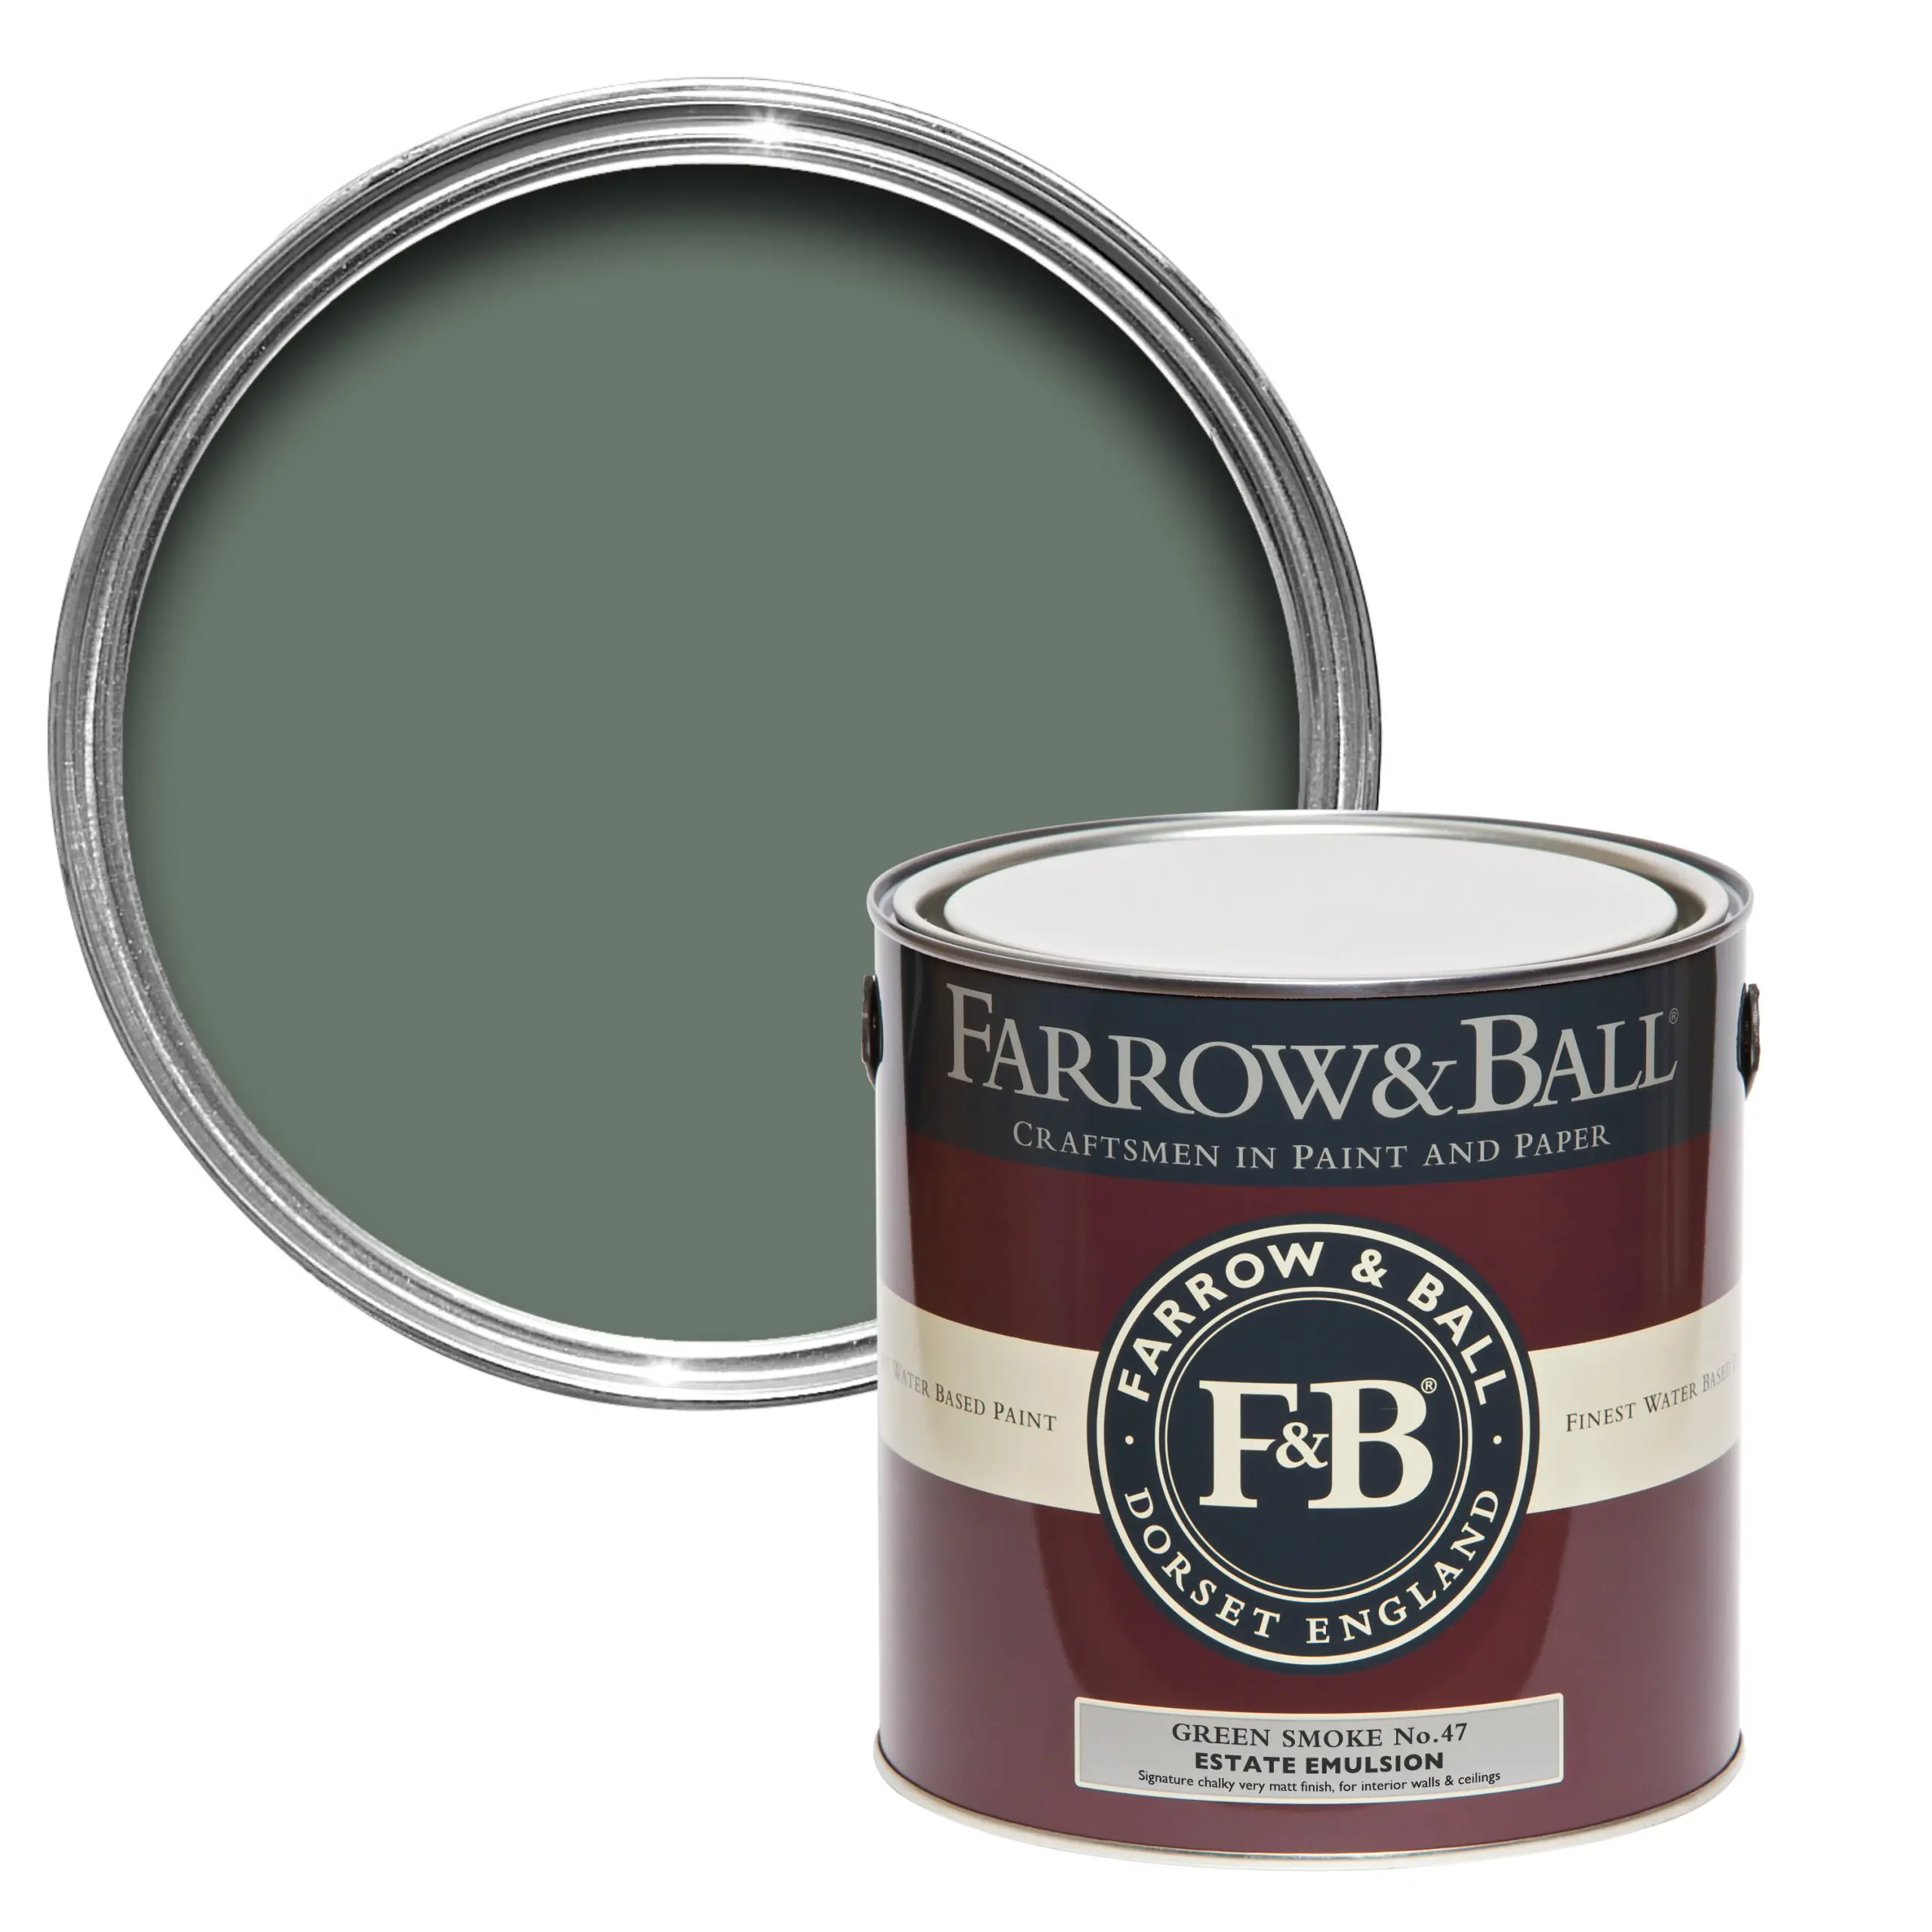 smoked green farrow and ball - What is the color green smoke by Farrow and Ball